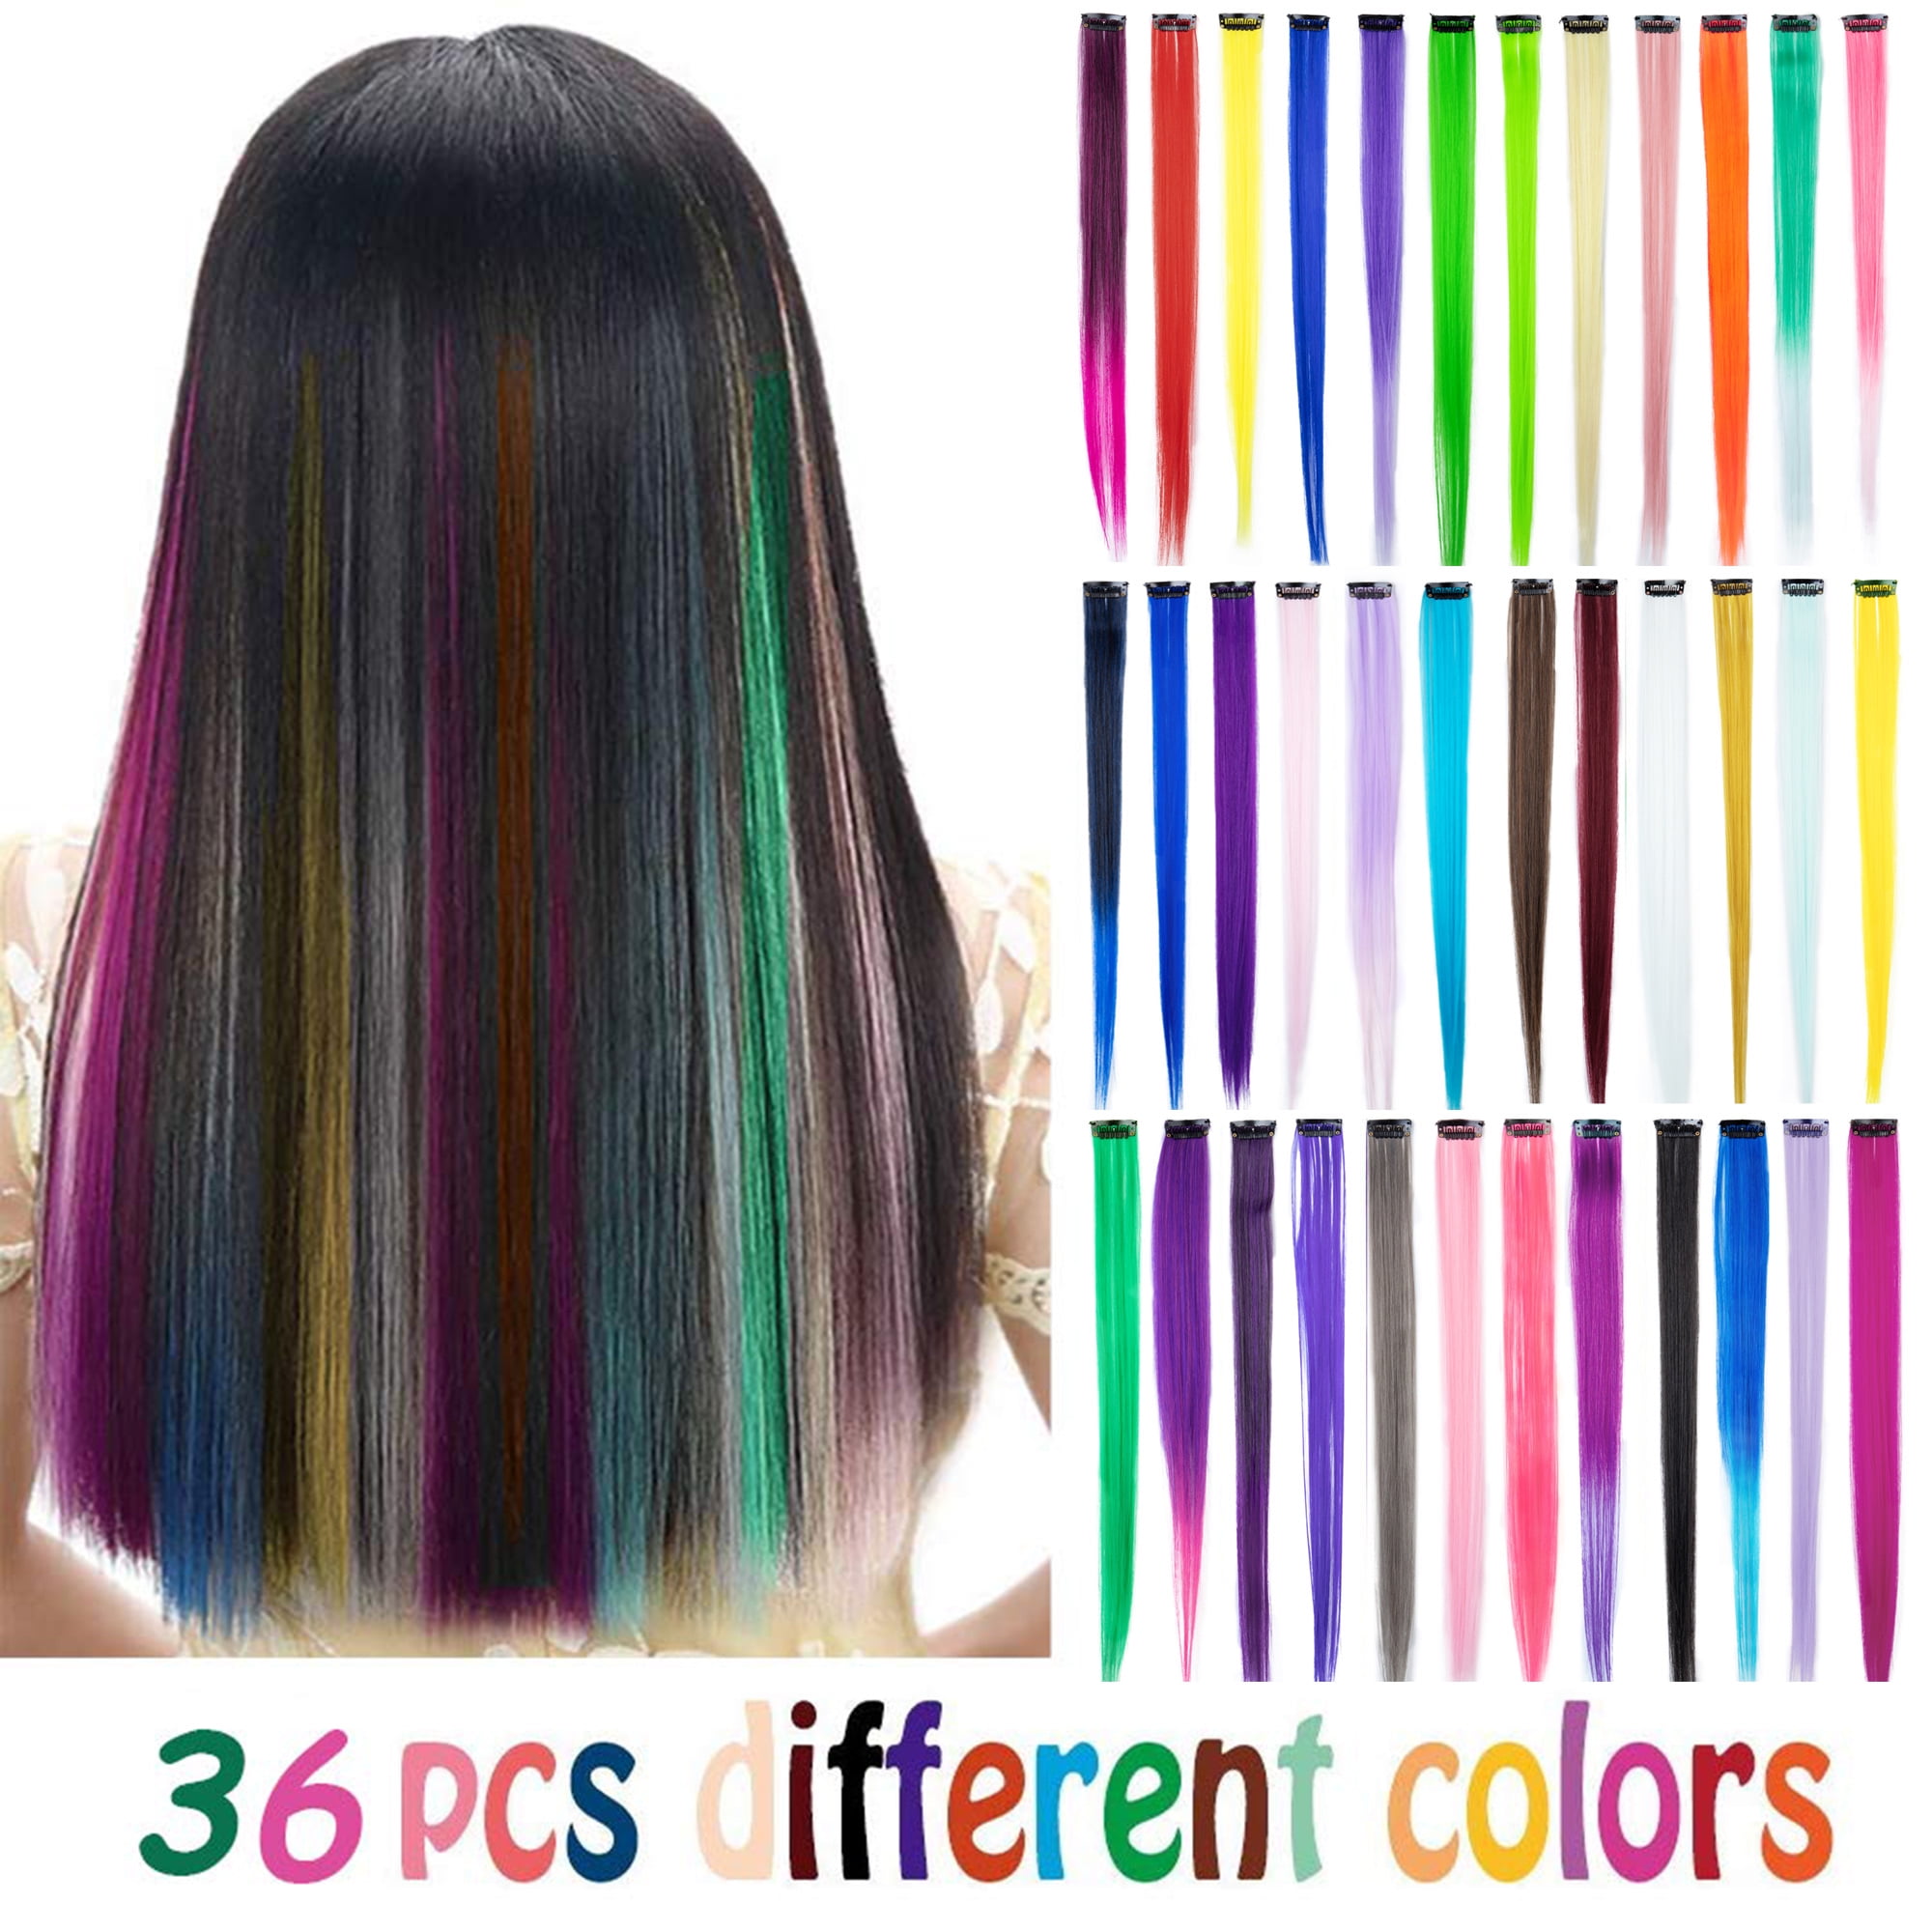 FLORATA Colored Clip in Hair Extensions, Colorful Straight Long Hair